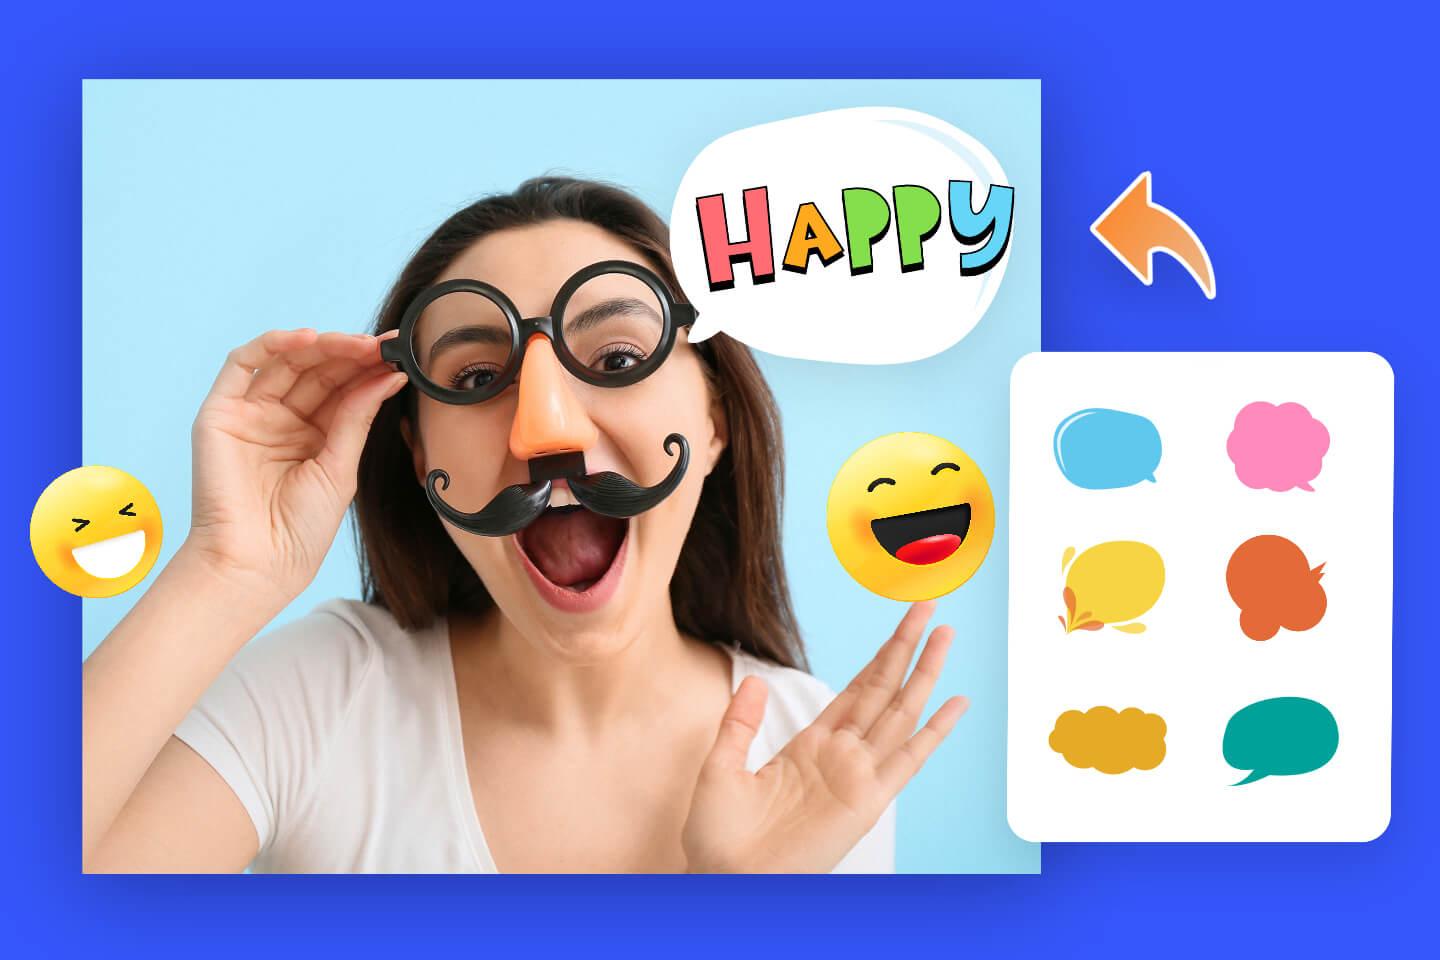 Add coloful speech bubbles to a funny portrait with Fotor